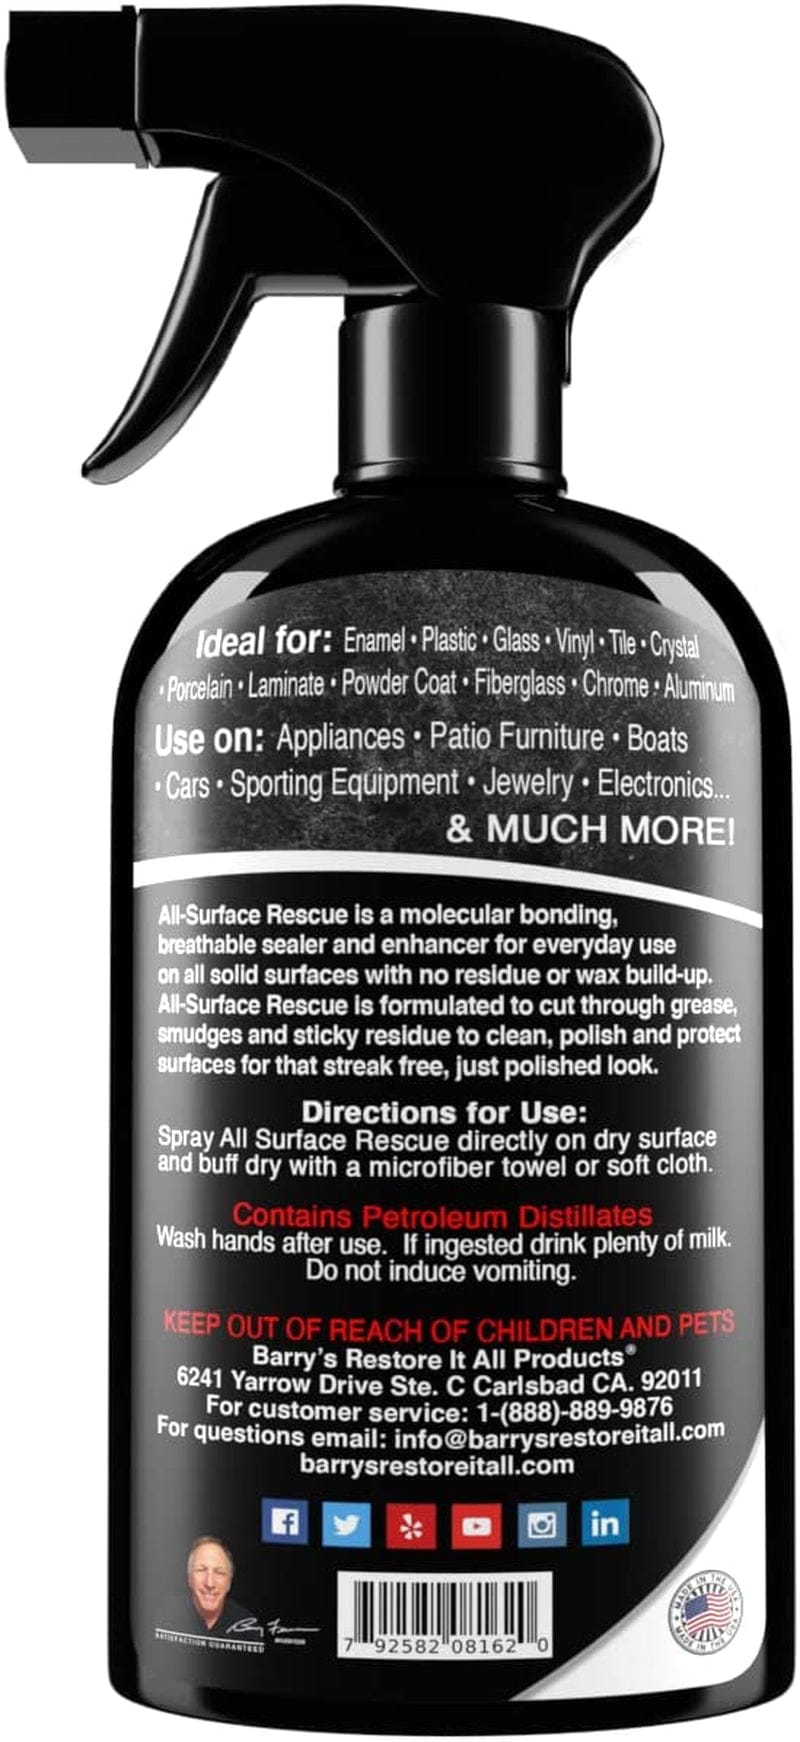 Barry'S Restore It All Products - All Surface Rescue Spray (16Oz.) | the Perfect Cleaning Solutions for All Surfaces Found in Your Kitchen, Home and Appliances! Home & Garden > Household Supplies > Household Cleaning Supplies Barry's Restore It All Products   